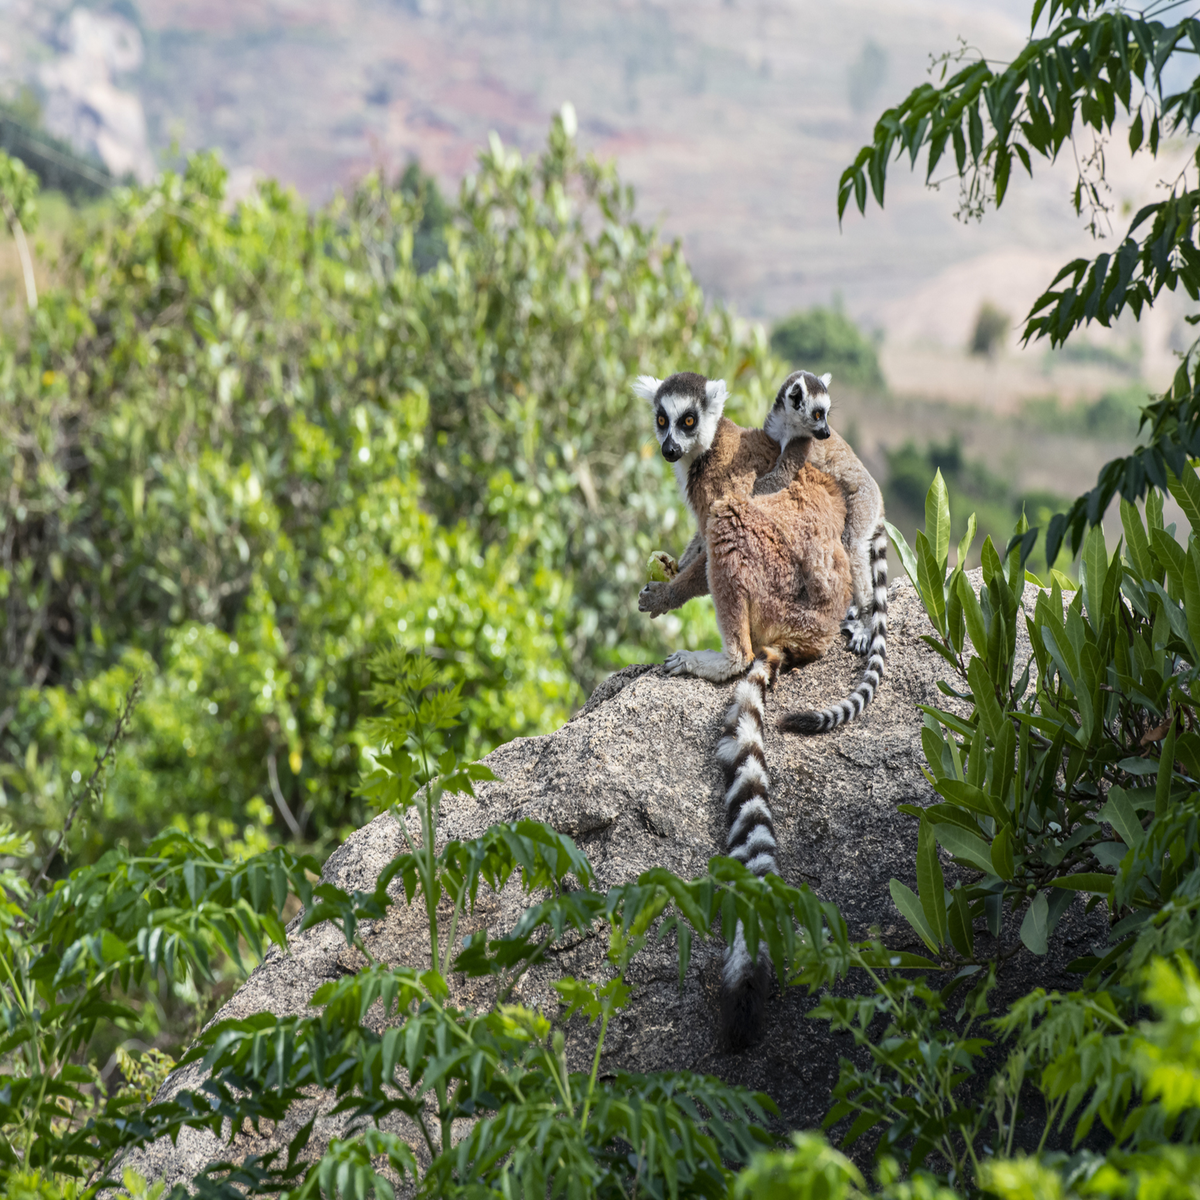 Your Trip to Madagascar: An Eco-Friendly Visit to the Biodiverse Island  Nation - Ecotourism World